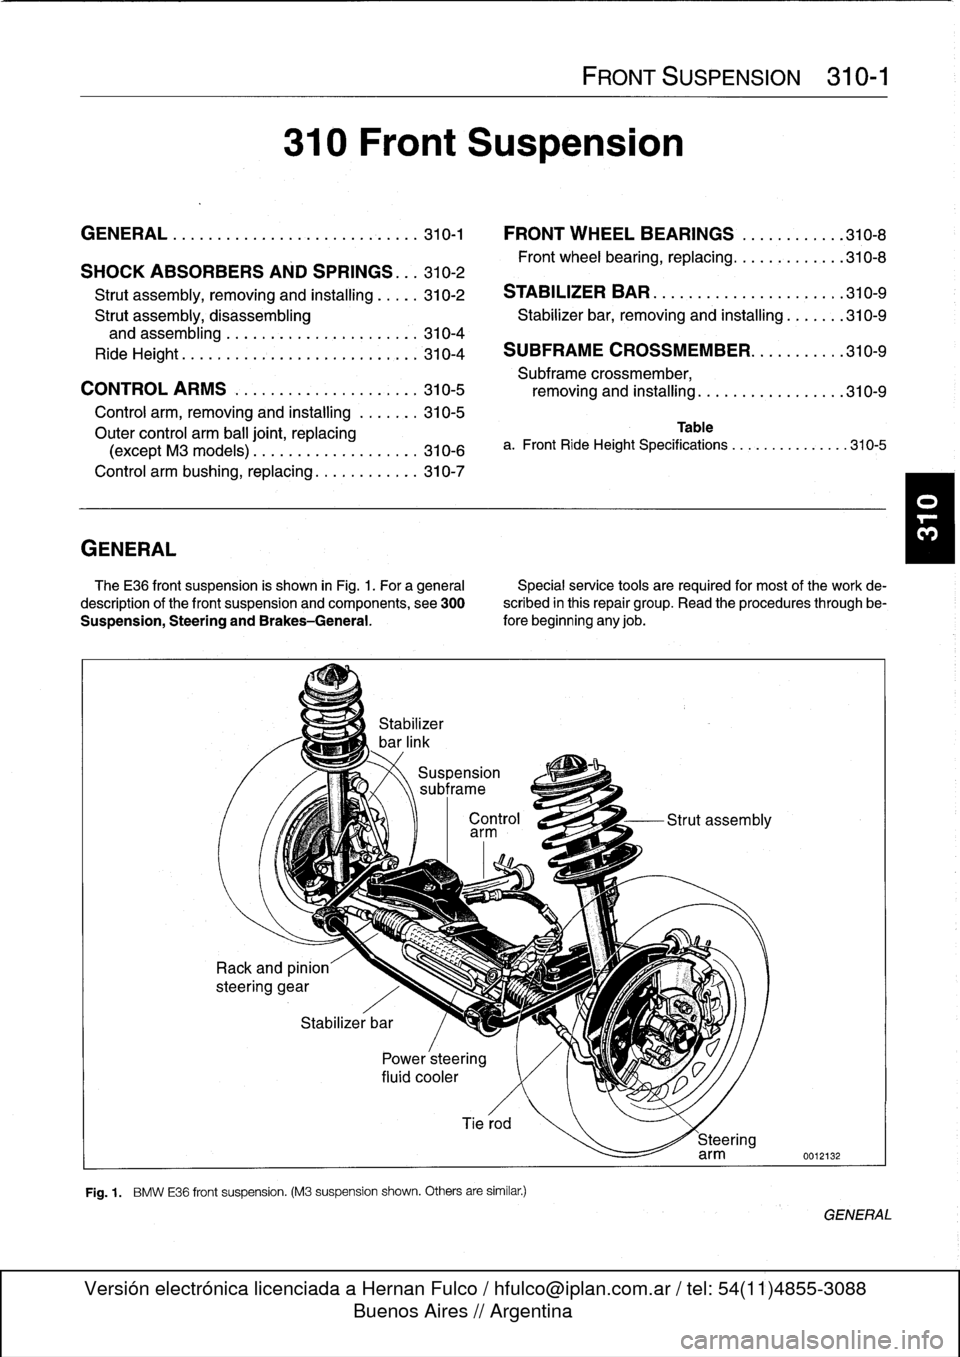 BMW 328i 1994 E36 Owners Manual 
GENERAL

310
Front
Suspension

GENERAL
..
.
.
.
.
.
.
.
.
.
.......
.
........
.
310-1

	

FRONT
WHEEL
BEARINGS
..
.
.
.
.......
310-8

SHOCK
ABSORBERS
AND
SPRINGS
..
.
310-2

	

Front
wheel
bearing,